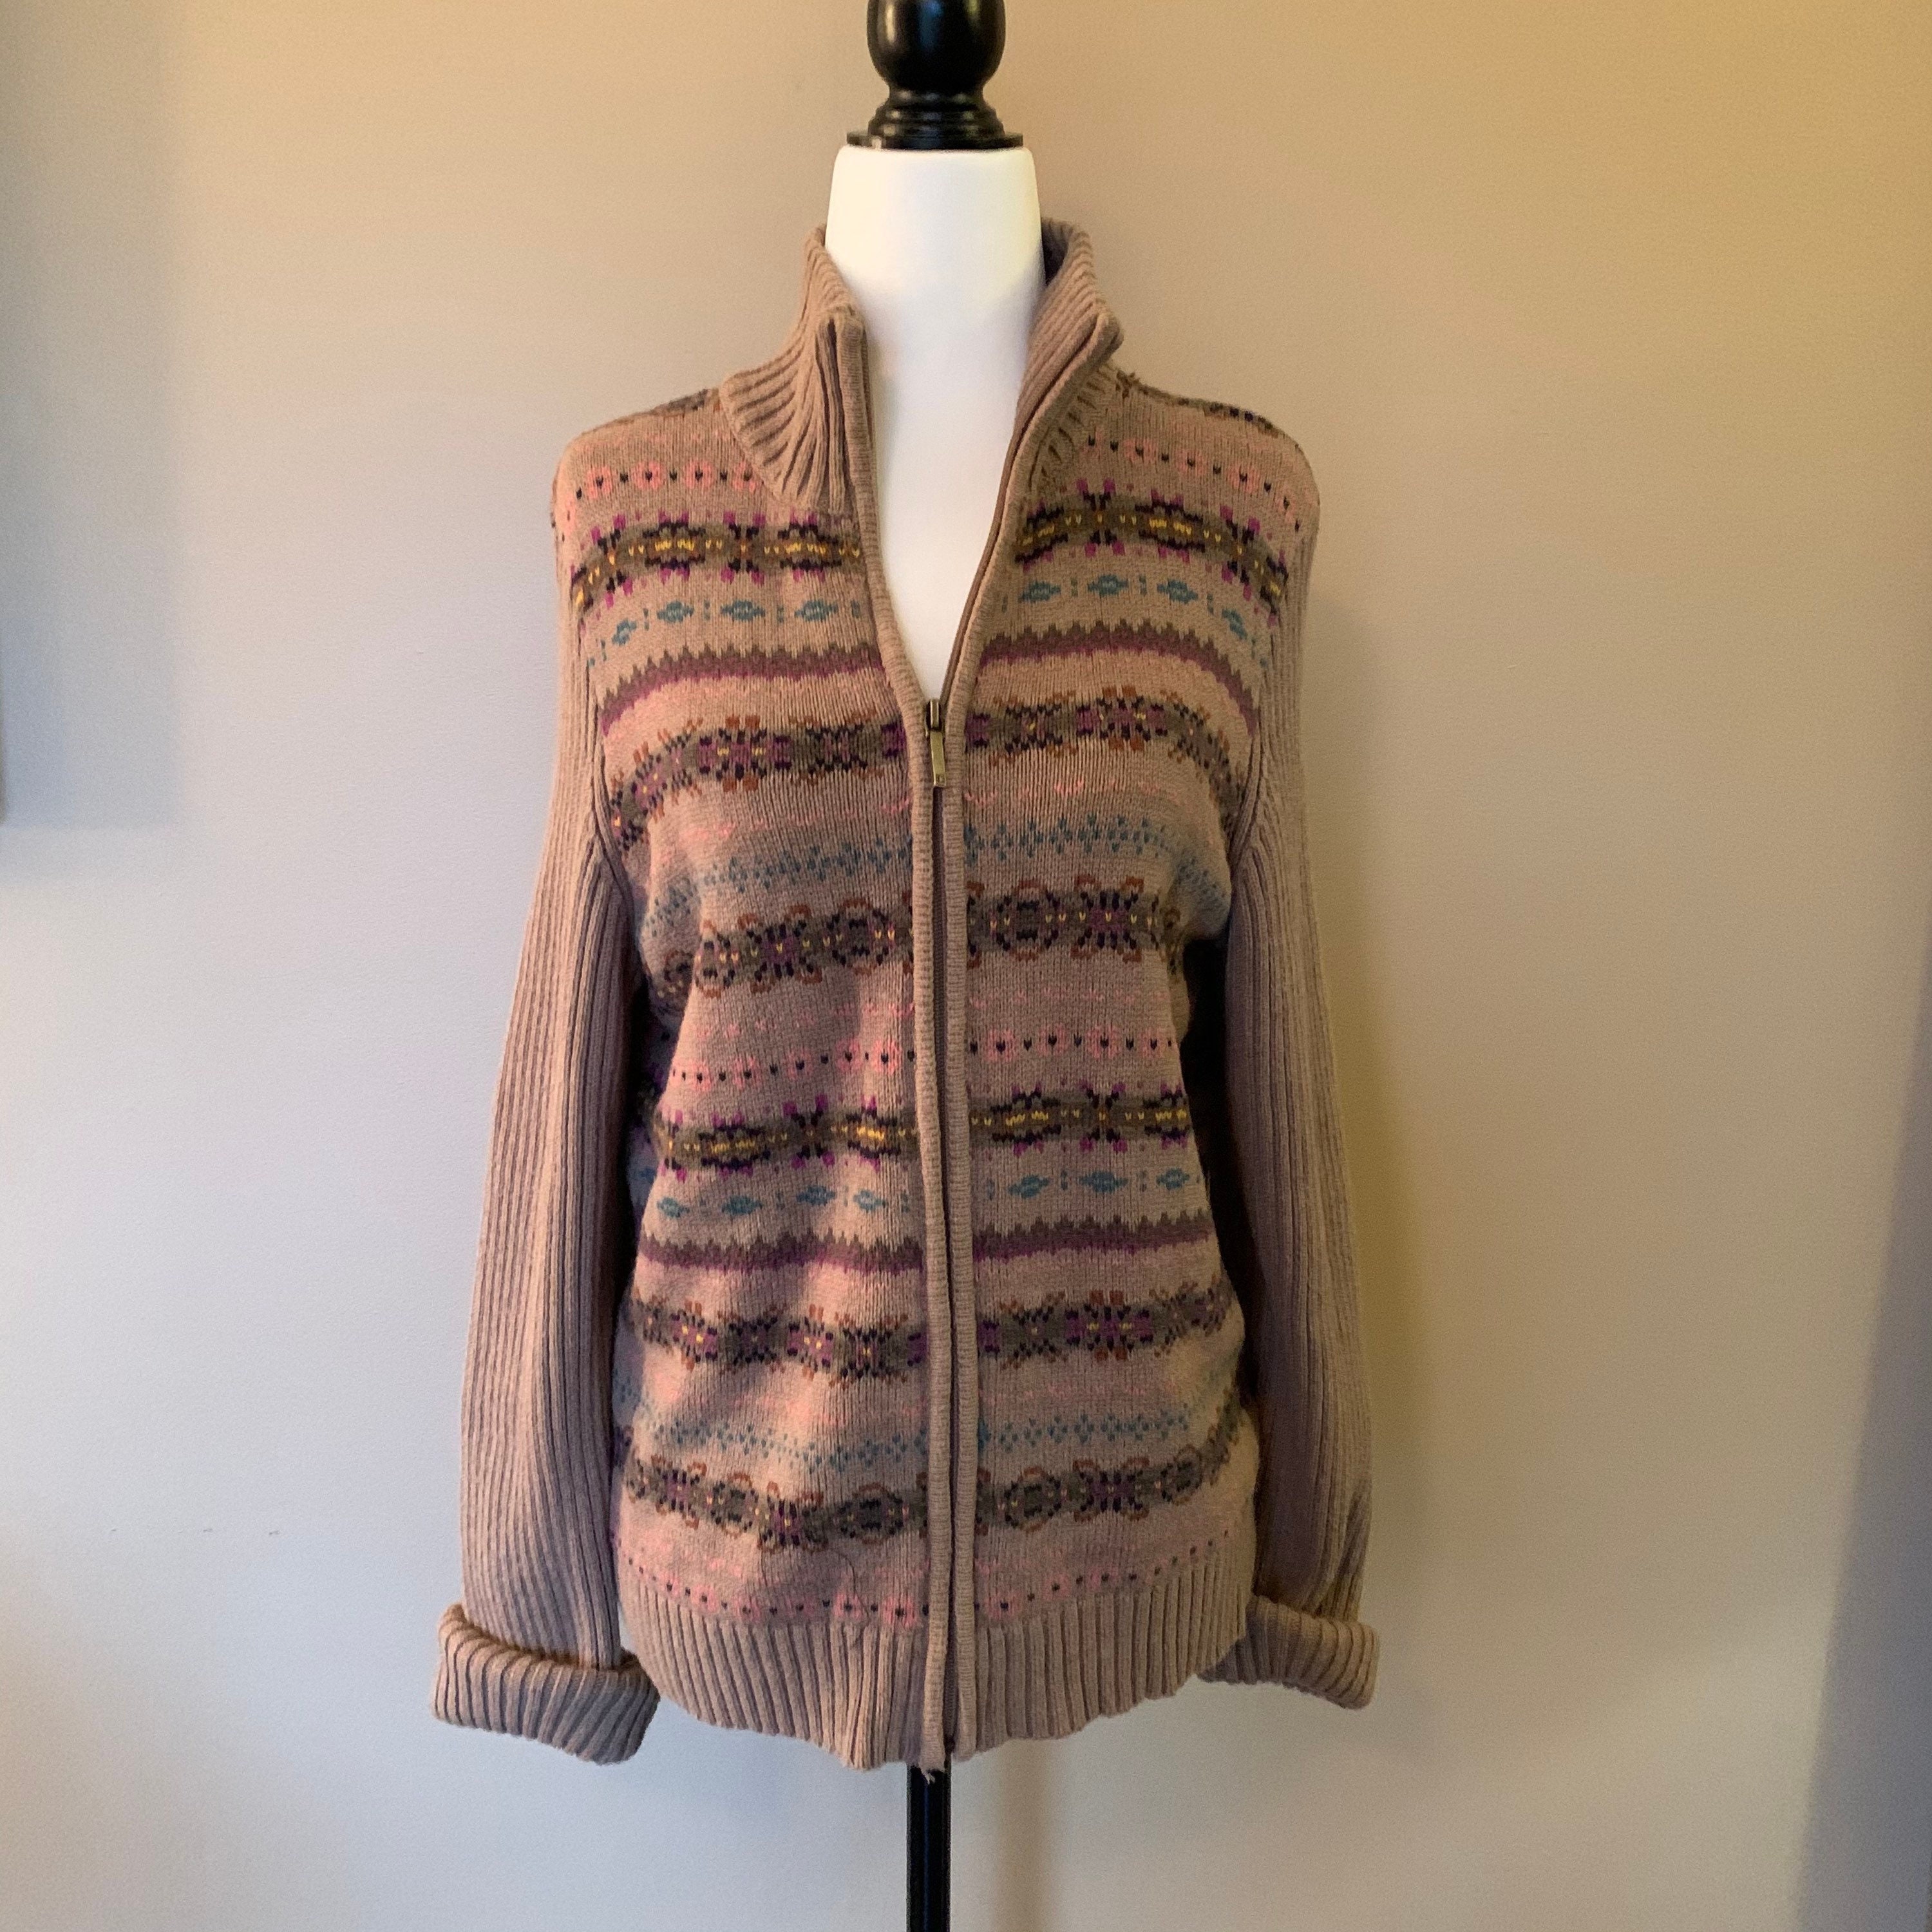 Oatmeal Beige Long Knitted Cardigan With Hood, Oversized Soft and Cozy  Loose Weave Sweater 